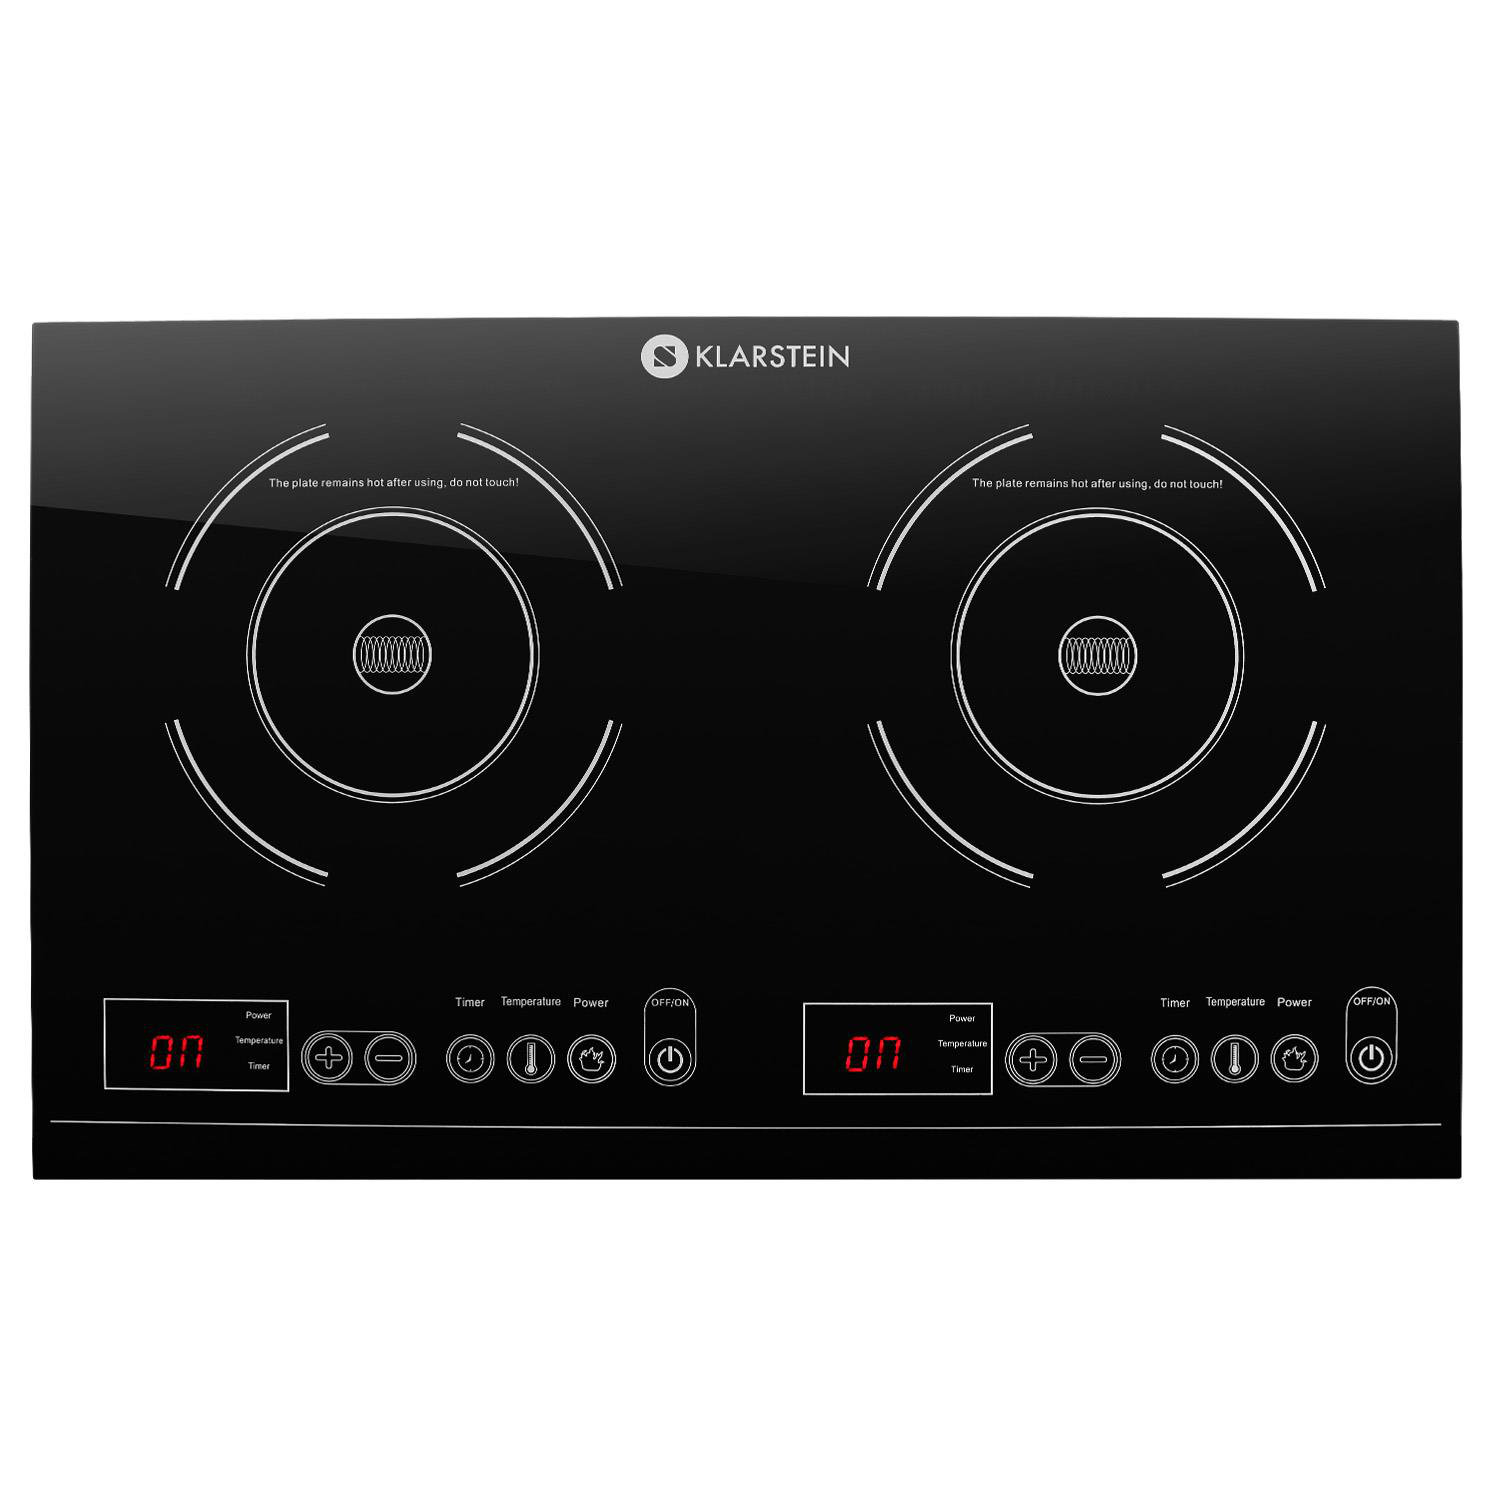 Timer KLARSTEIN VariCook Slim Double Induction Hob Black LED Touch Control Child Safety 2 Field Induction Hot Plate 3500W 240°C 10 PowTemperature Levels 